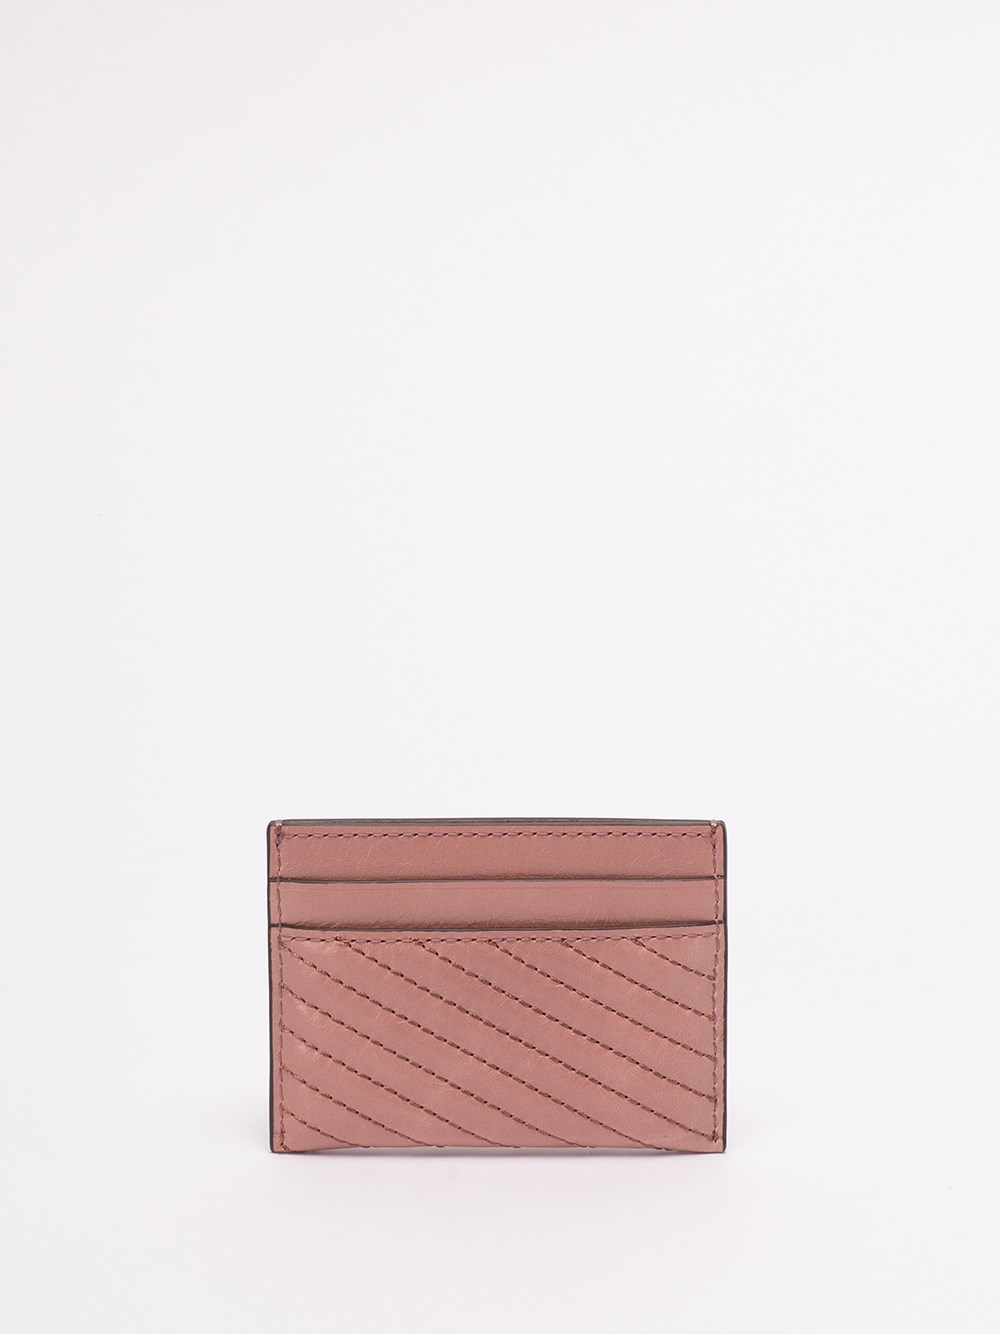 tory burch `kira moto` quilted leather card case available on